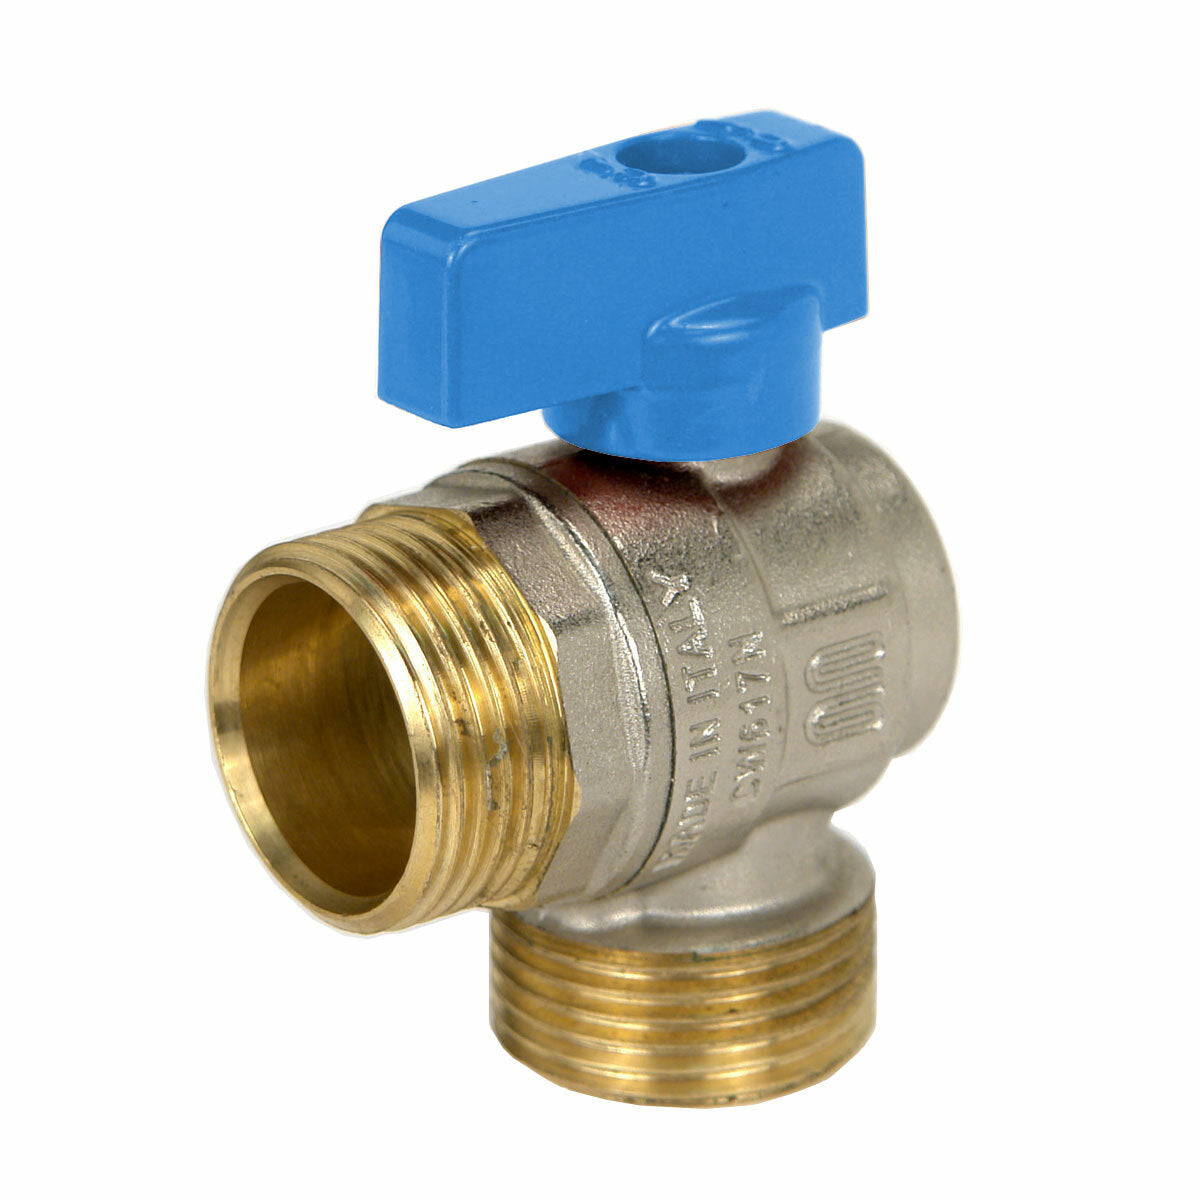 Enolgas Reverso ball valve with blue lever multilayer connection 1" x 1"